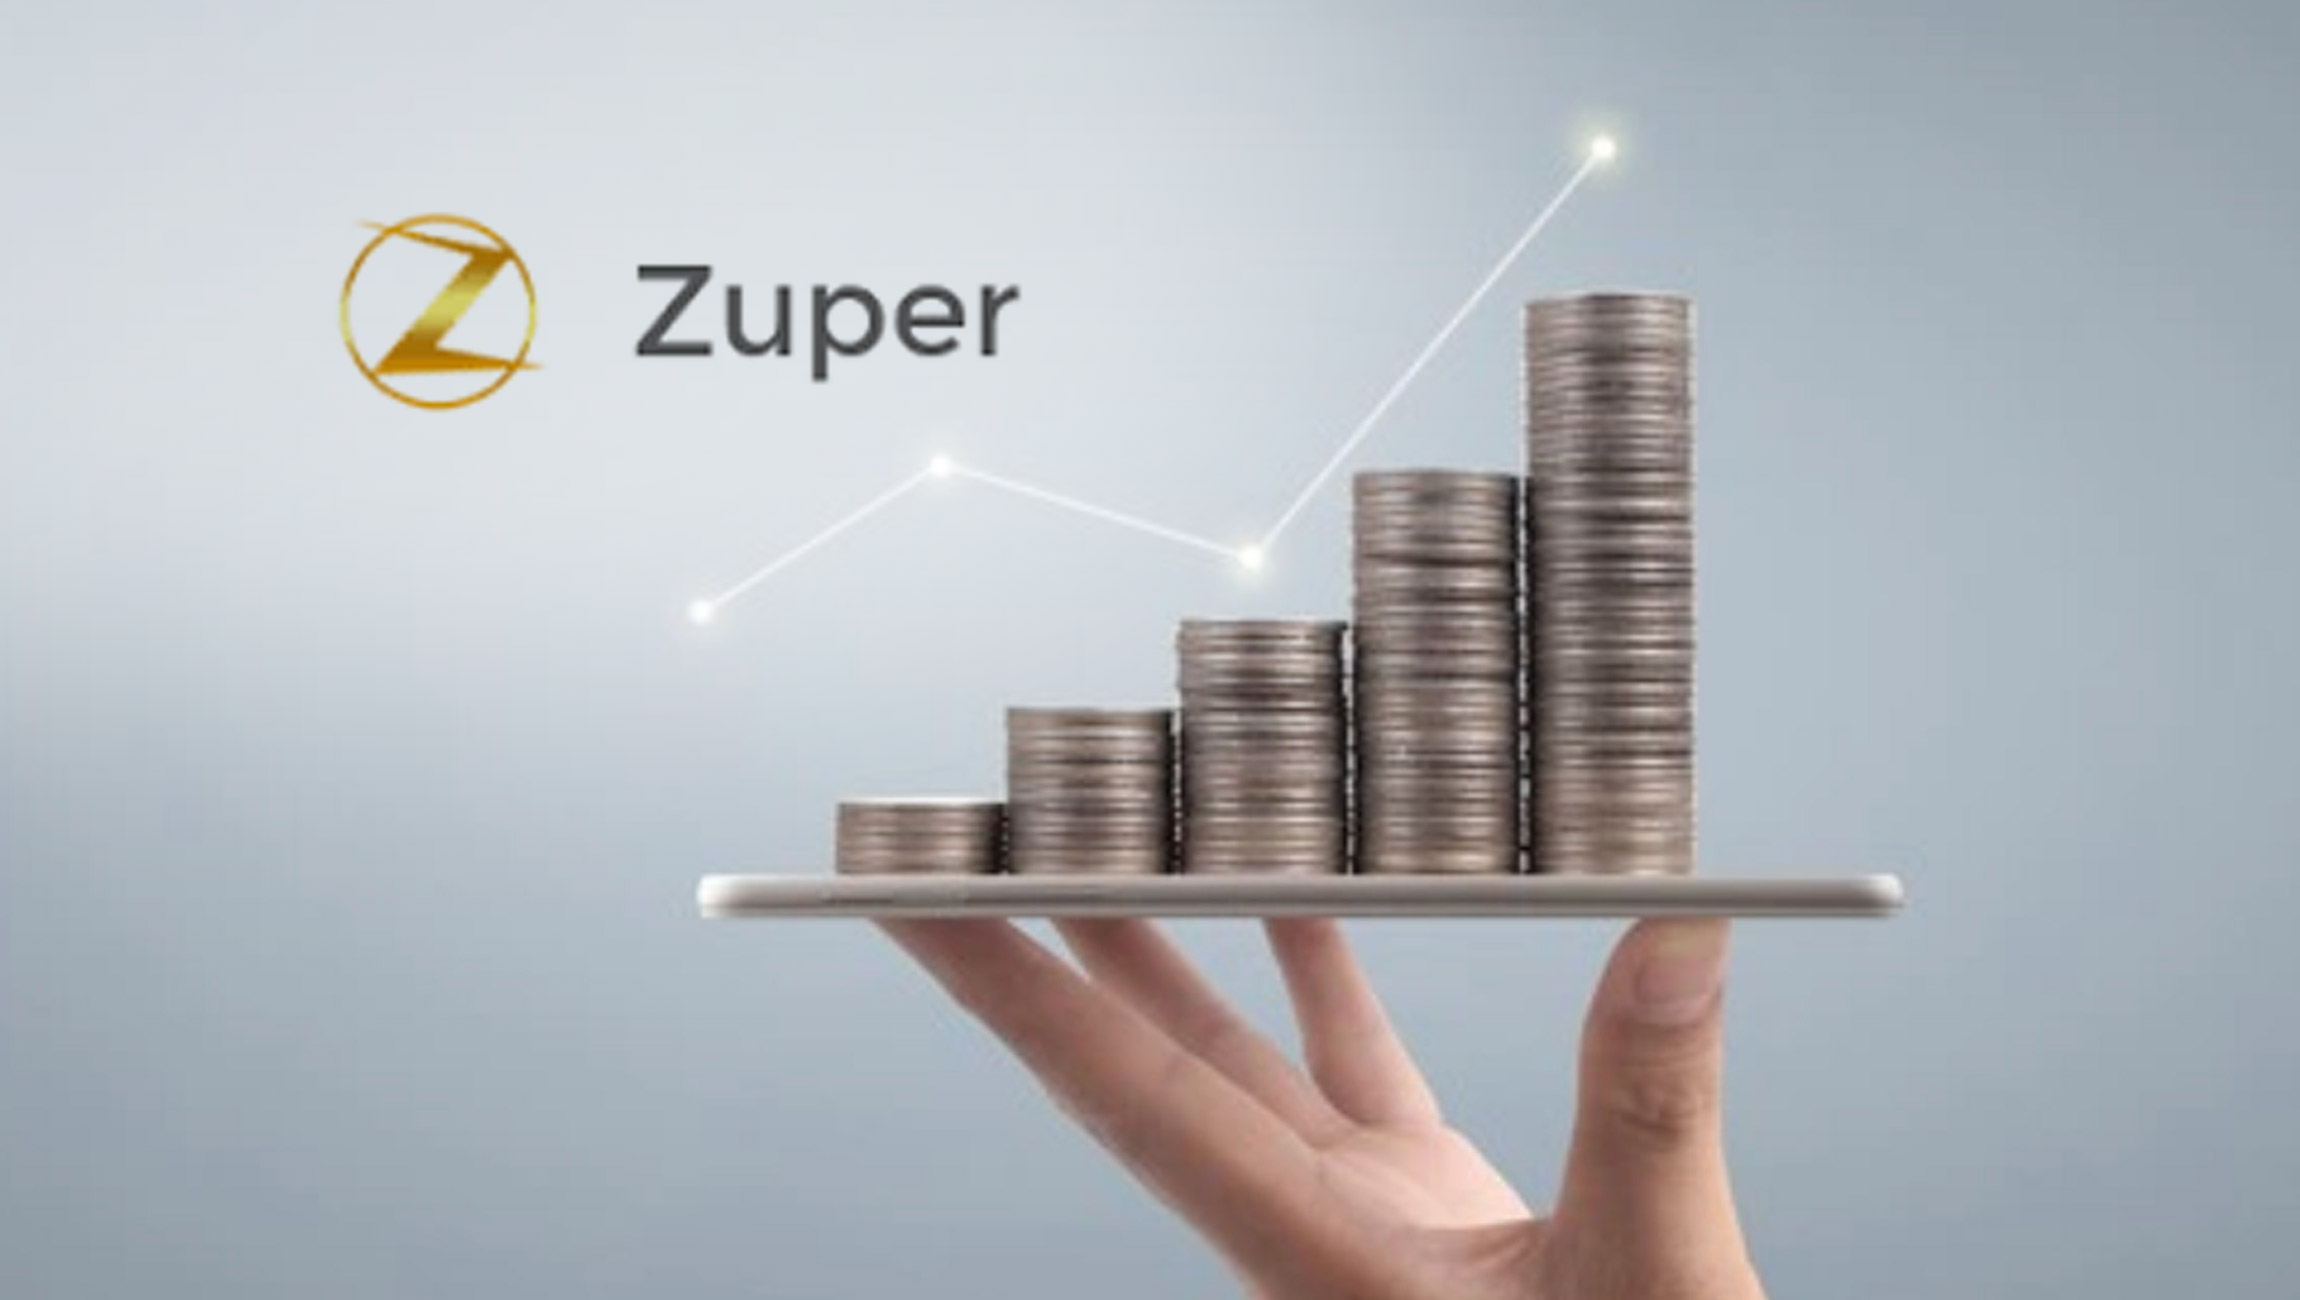 Zuper-Hires-Field-Service-Software-and-Operations-Expert-to-Accelerate-Growth-After-Successful-Series-A-Funding